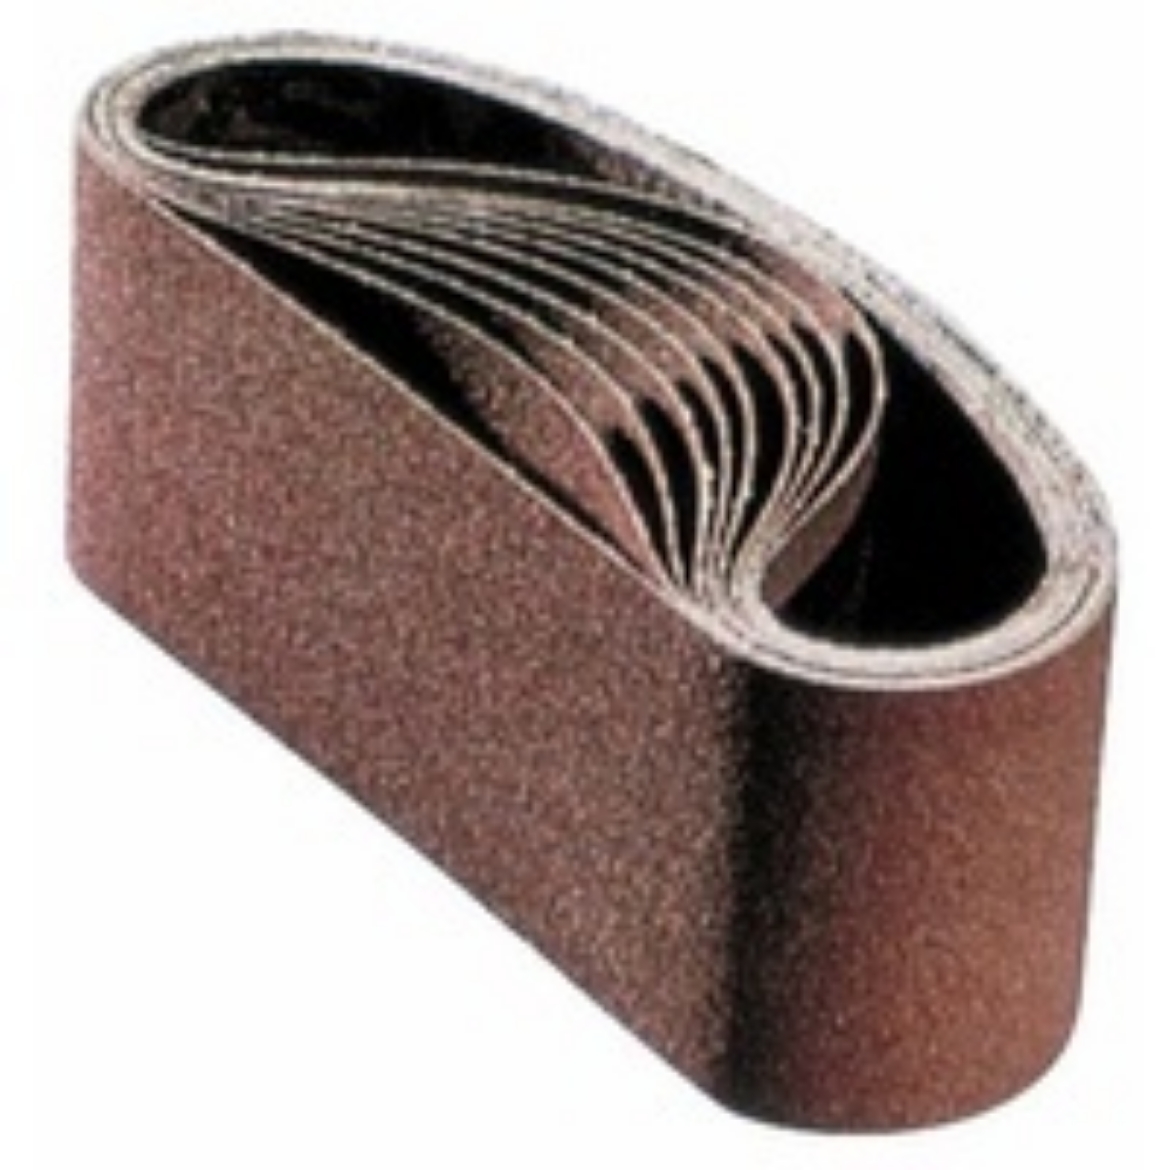 Picture of PFERD LINISHING BELT - ALUMINIUM OXIDE - GP - 100 X 914 AX 80 GRIT (PACK OF 6)